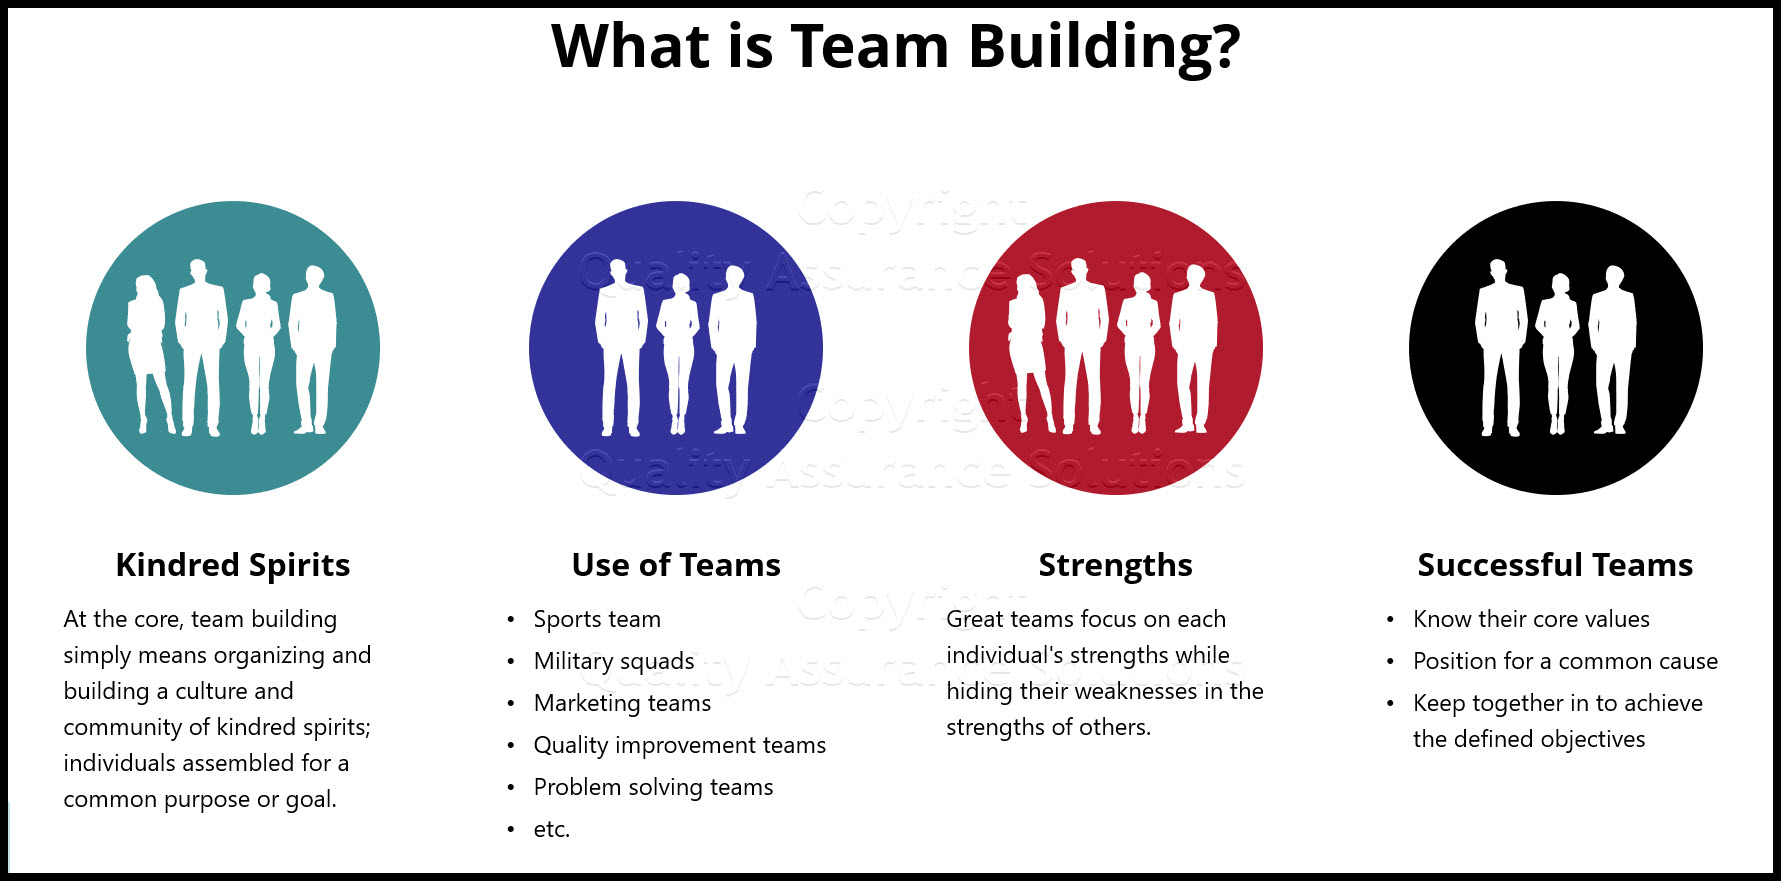 What is team building? An important question that focuses many teamwork principles.